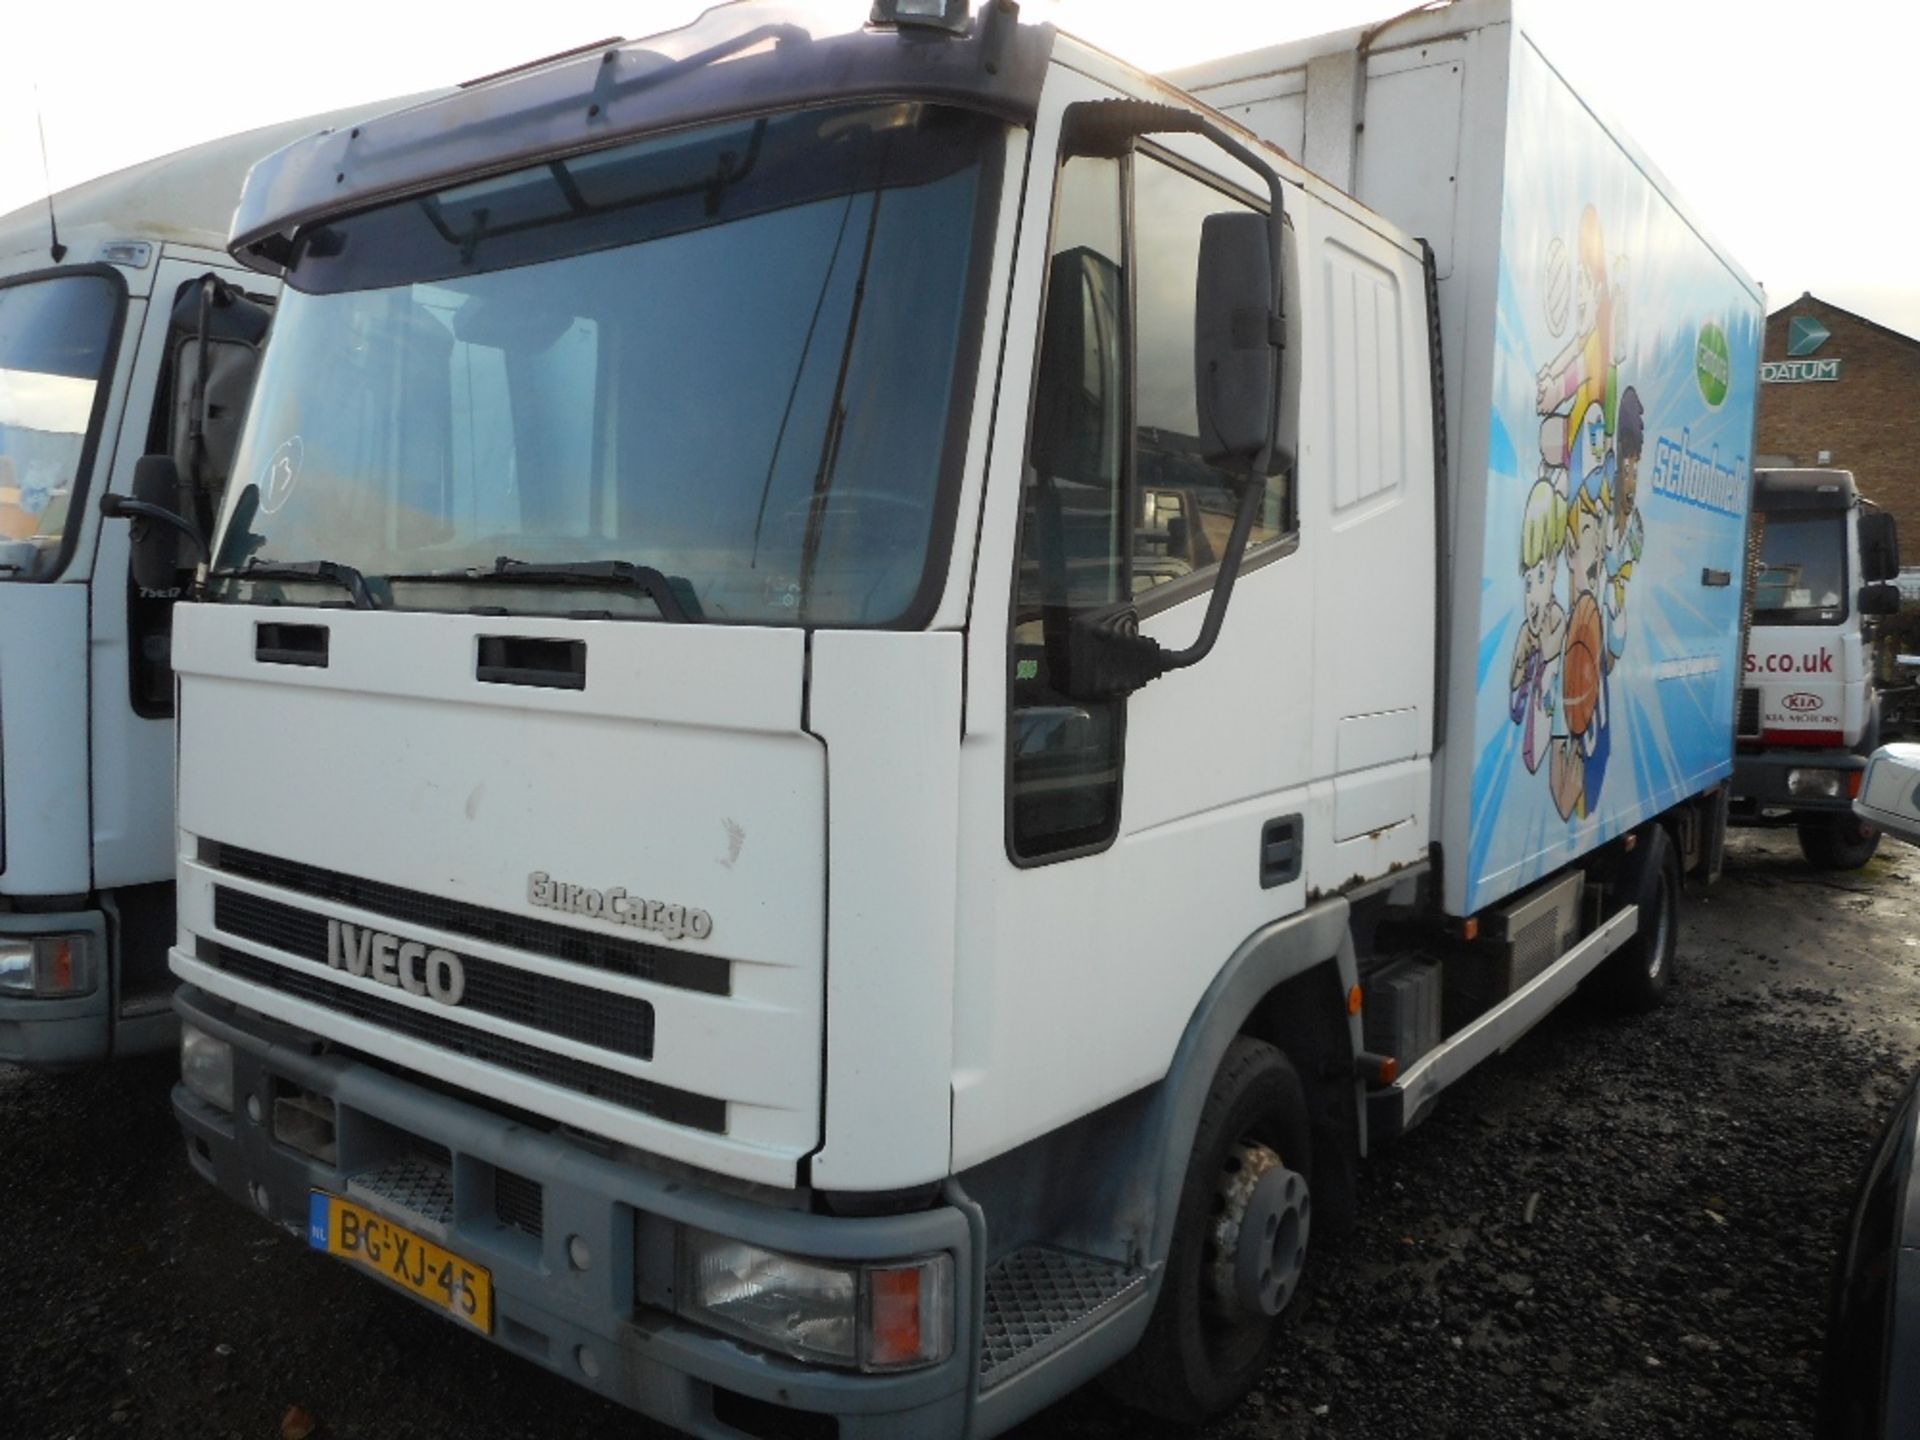 Ford Eurocargo LHD sleeper cabbed fridge lorry currently registered in Holland.